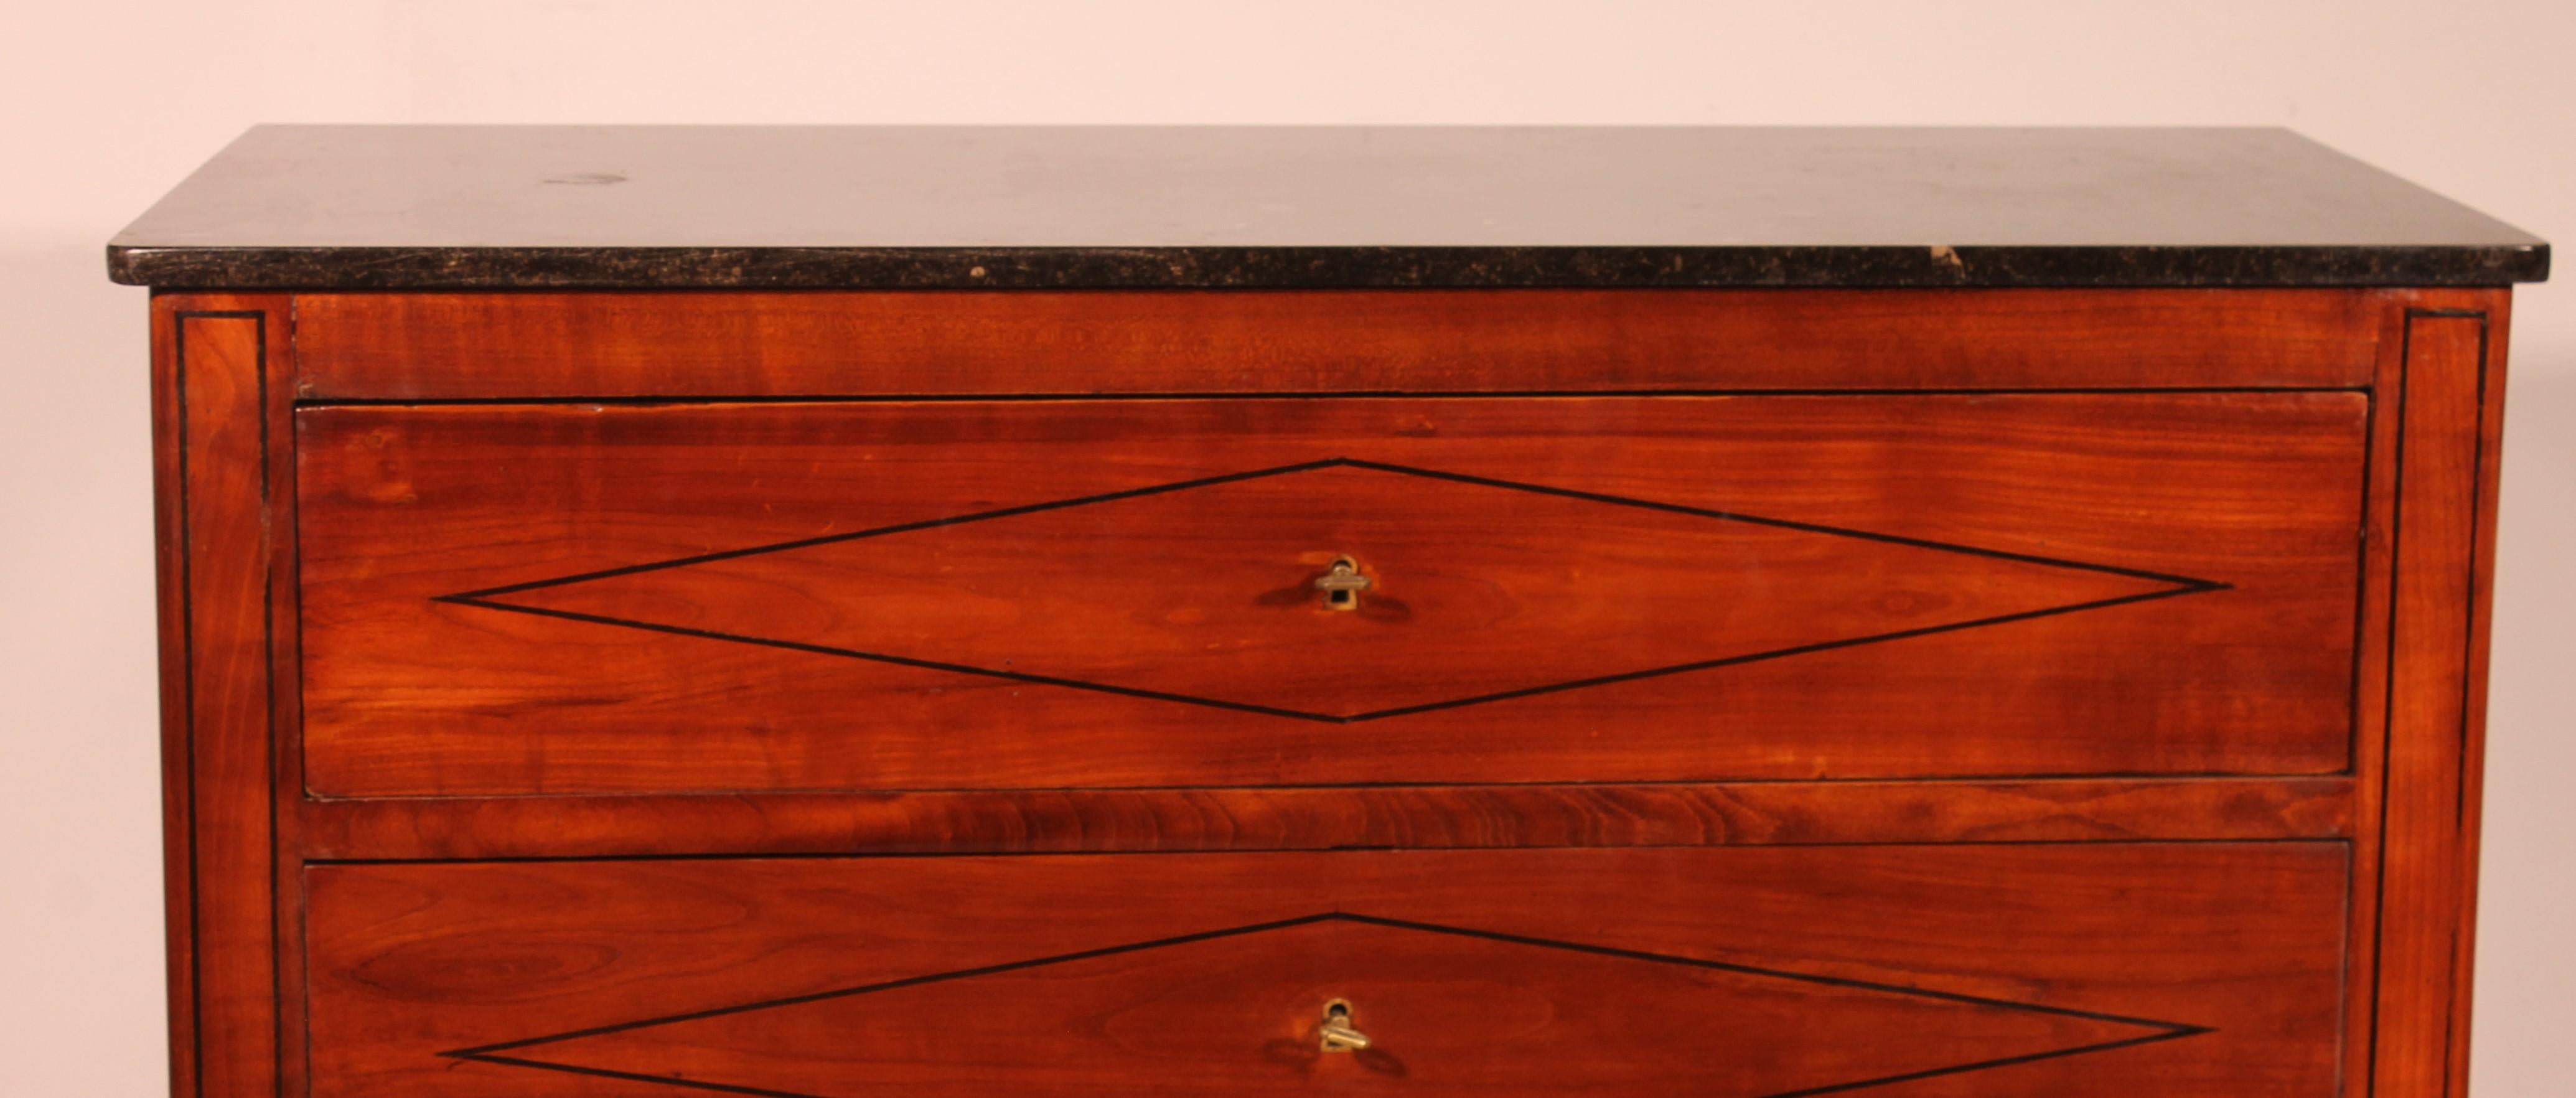 lovely cherry wood chest of drawers from the second part of the 19th century

Elegant chest of drawers made up of 3 drawers each decorated with a pear wood fillet and which have their working key
The uprights are also decorated with a pear wood